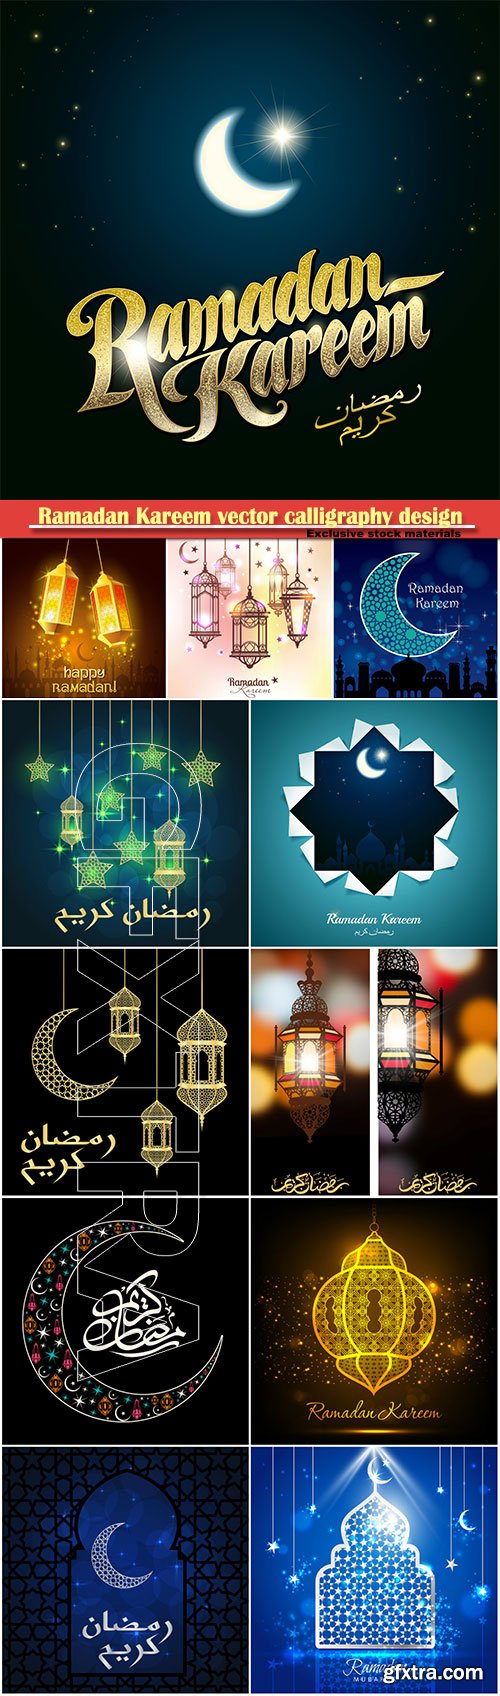 Ramadan Kareem vector calligraphy design with decorative floral pattern, mosque silhouette, crescent and glittering islamic background # 27